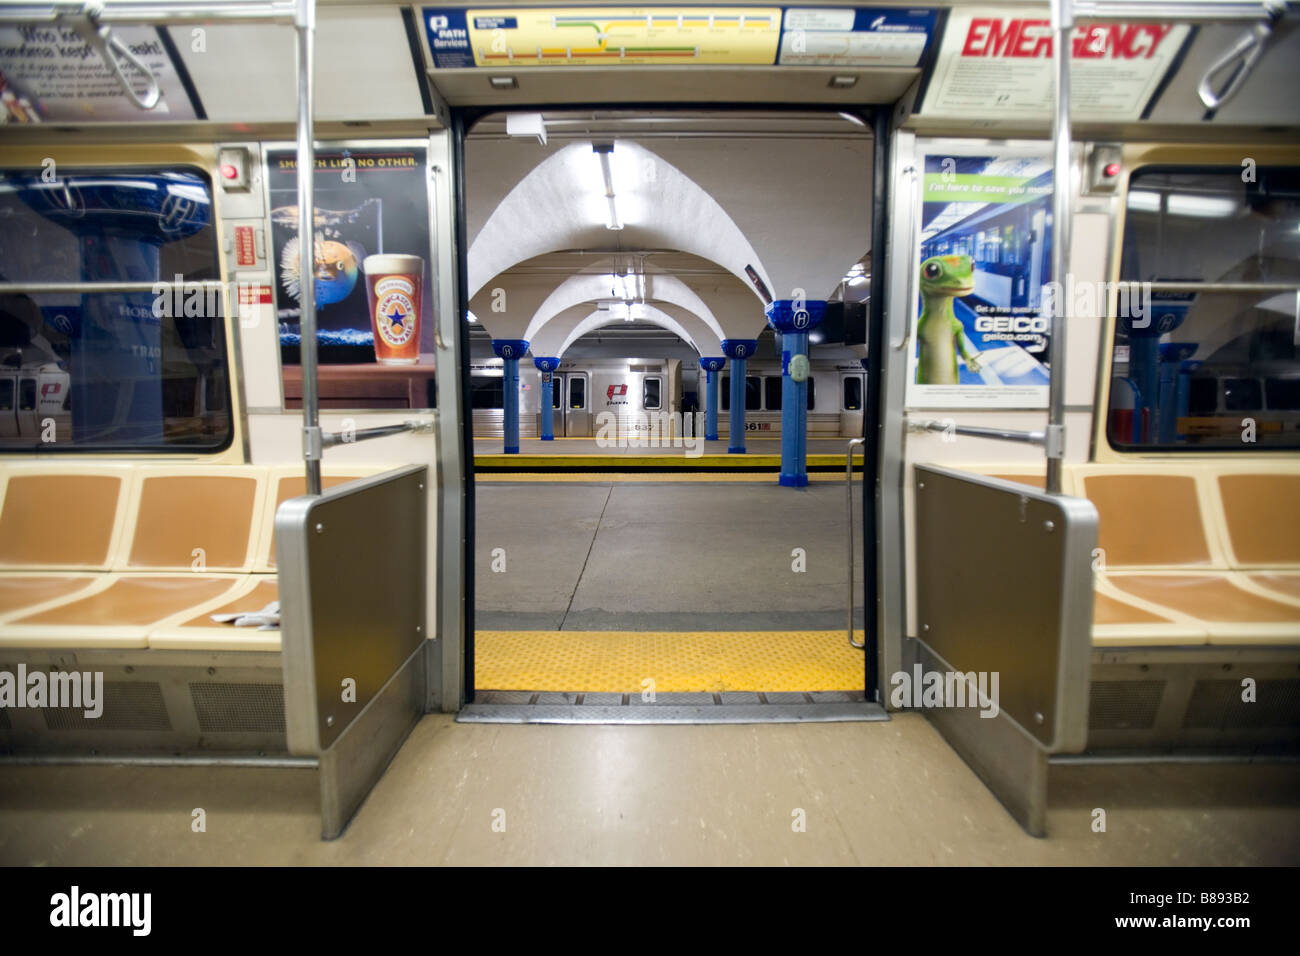 A view of a open door of a subway car in a subway station. Stock Photo